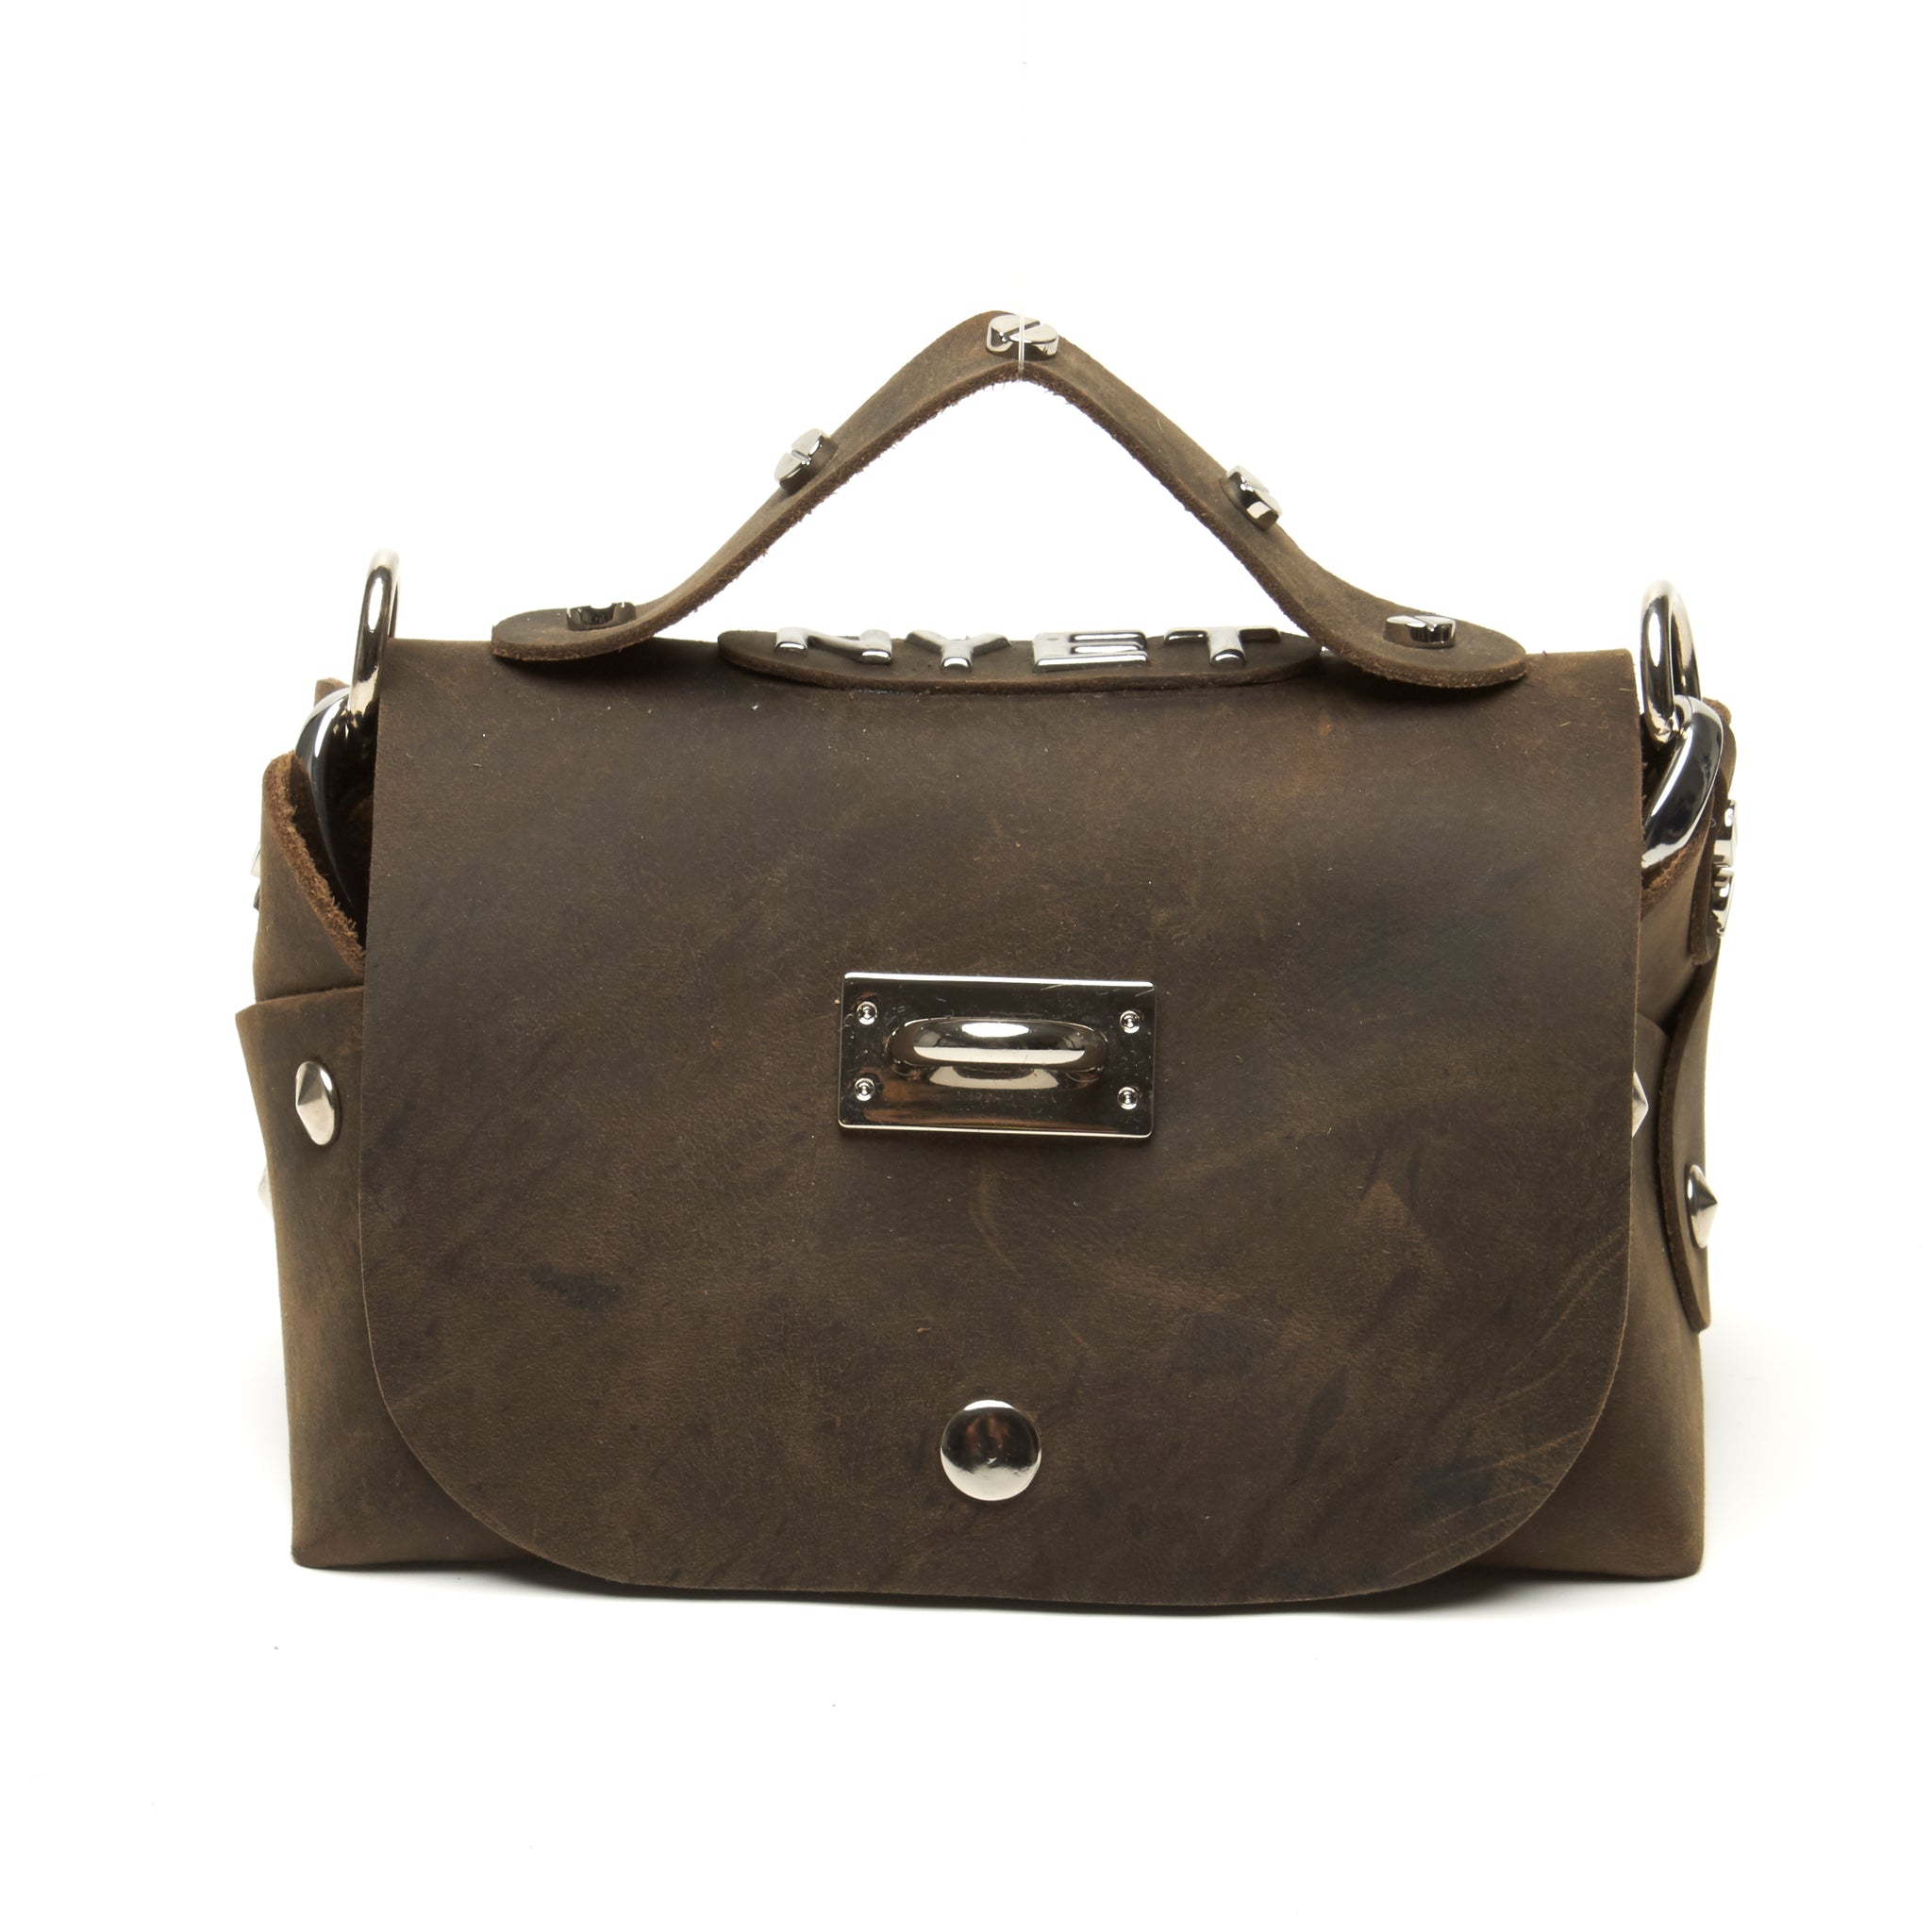 Distressed lunch bag with logo and accent hardware by NYET Jewelry.